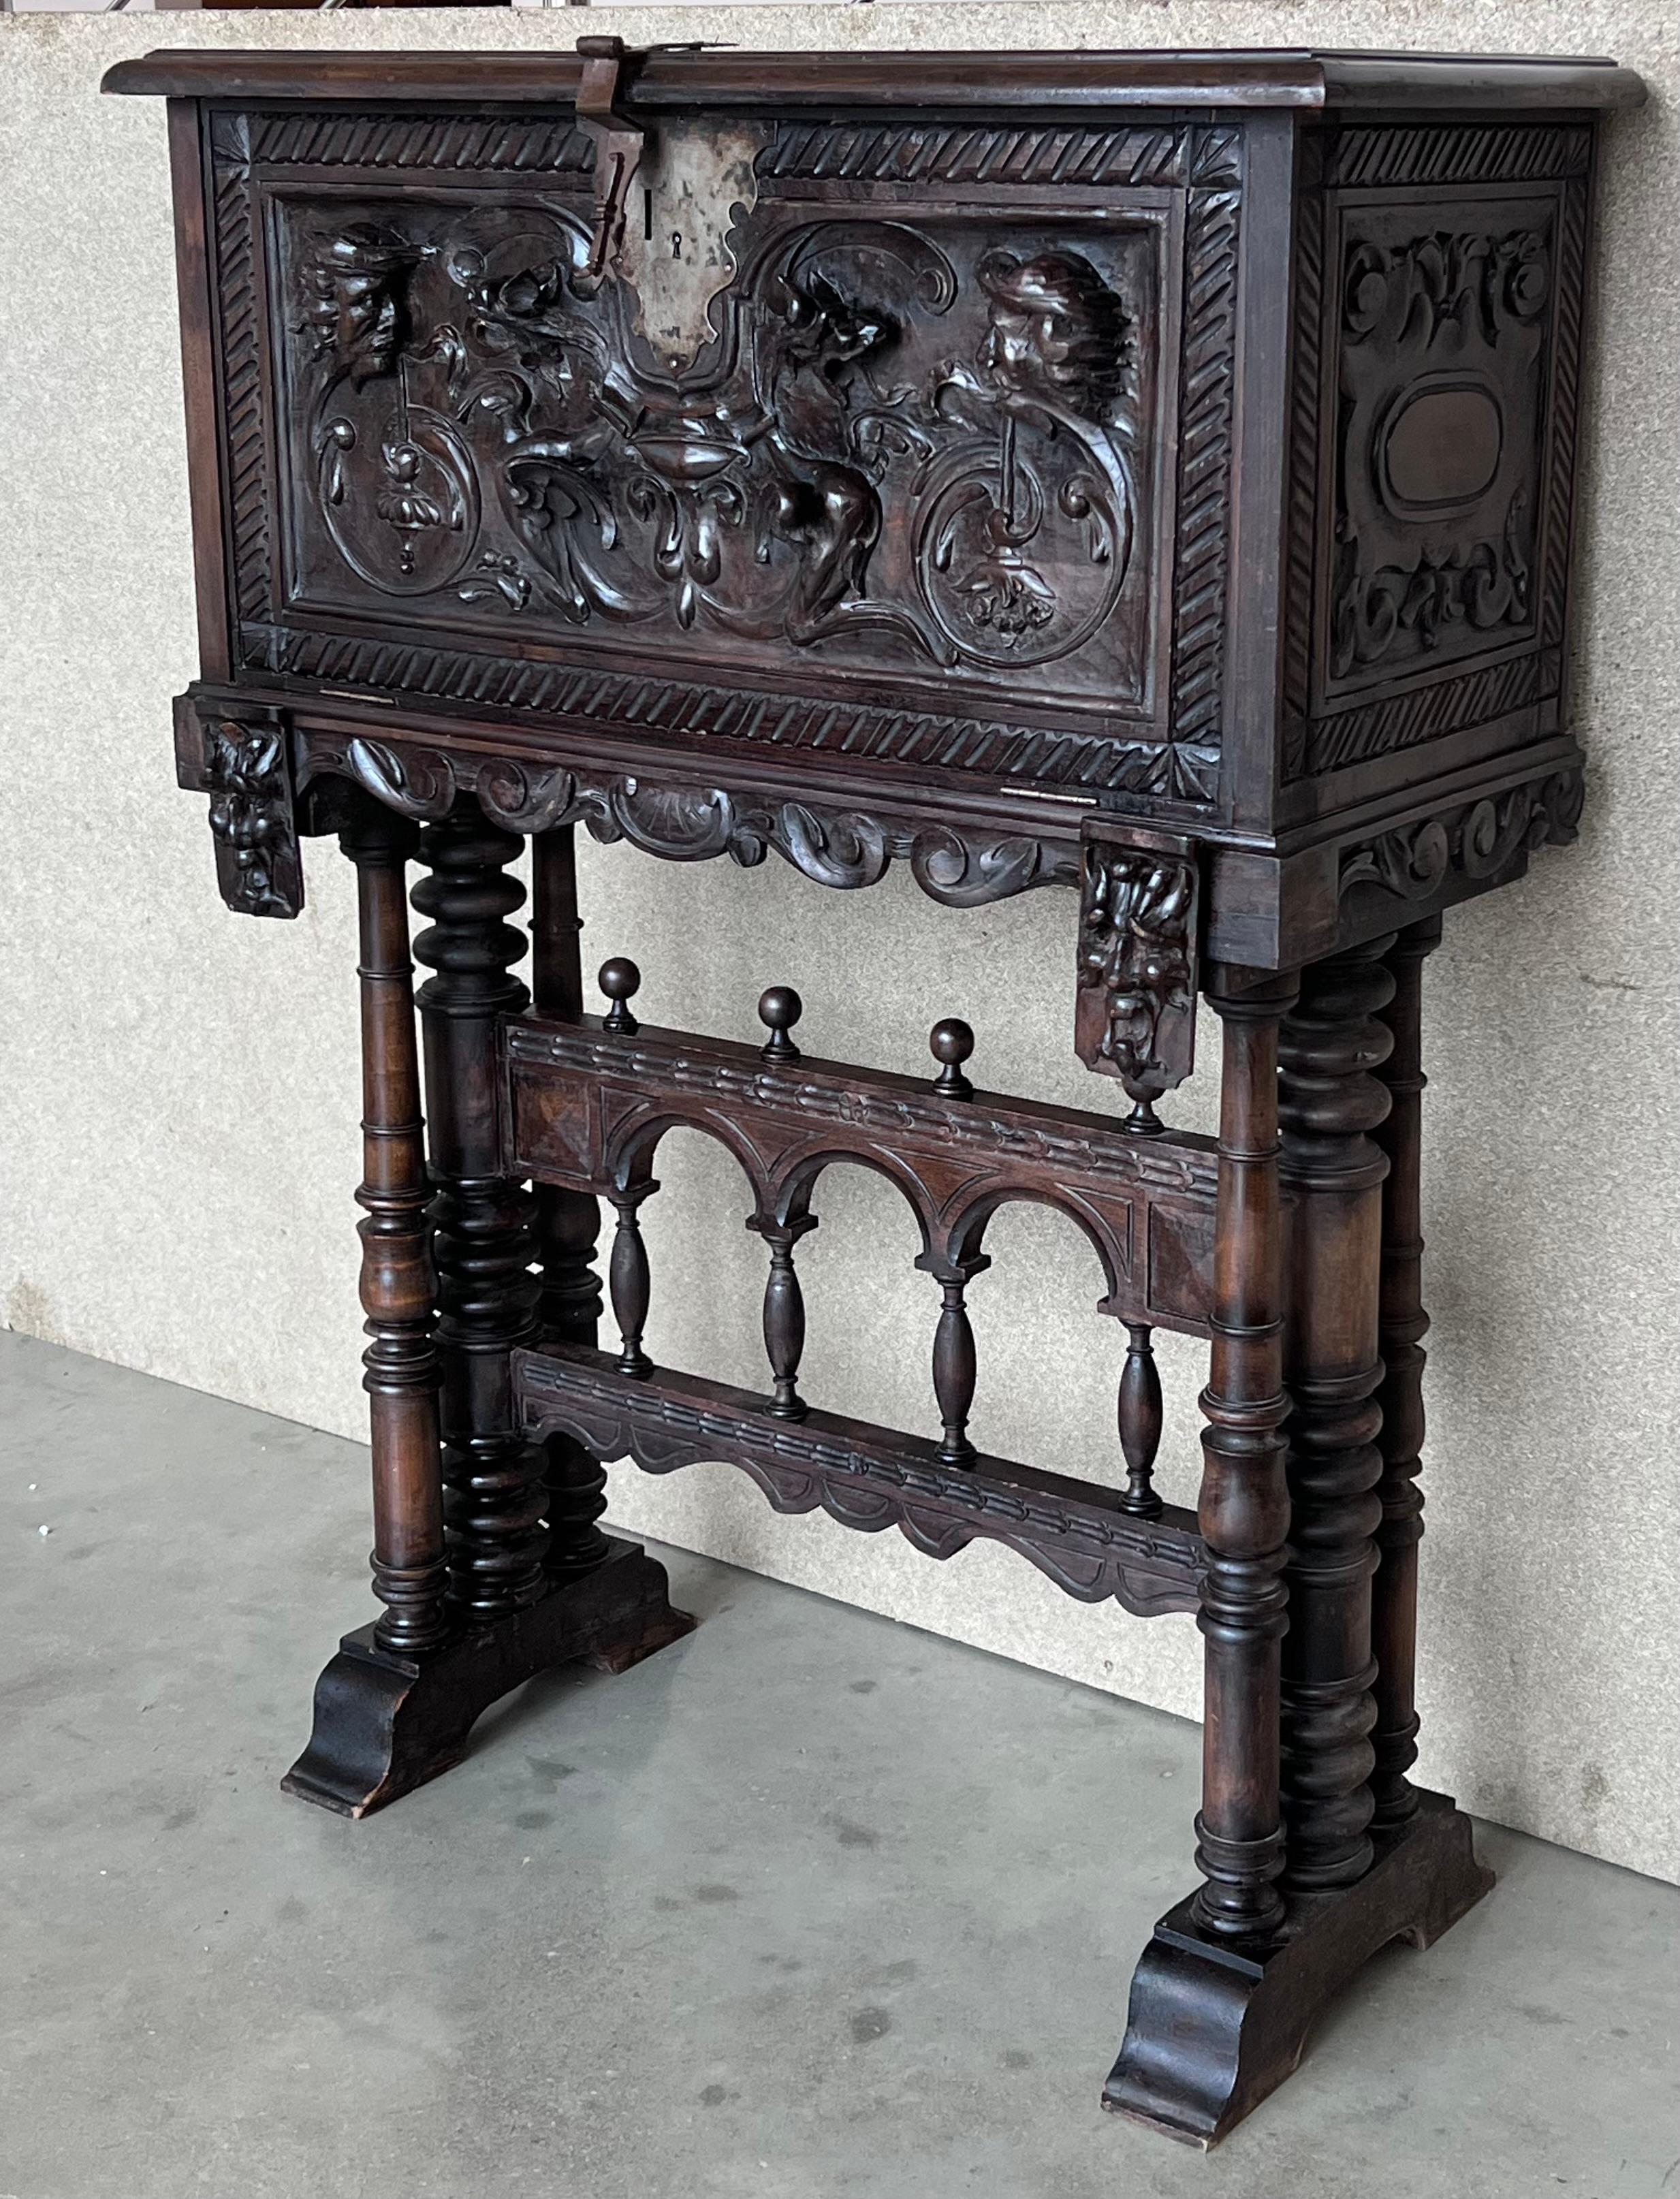 This Bargueno is embellished with a carving of Don Quixote de la Mancha bordered with branches of leaves. The desk is supported by a pedestal joined by a bridge of turned columns. The front legs contain a carving of two wind god heads with an